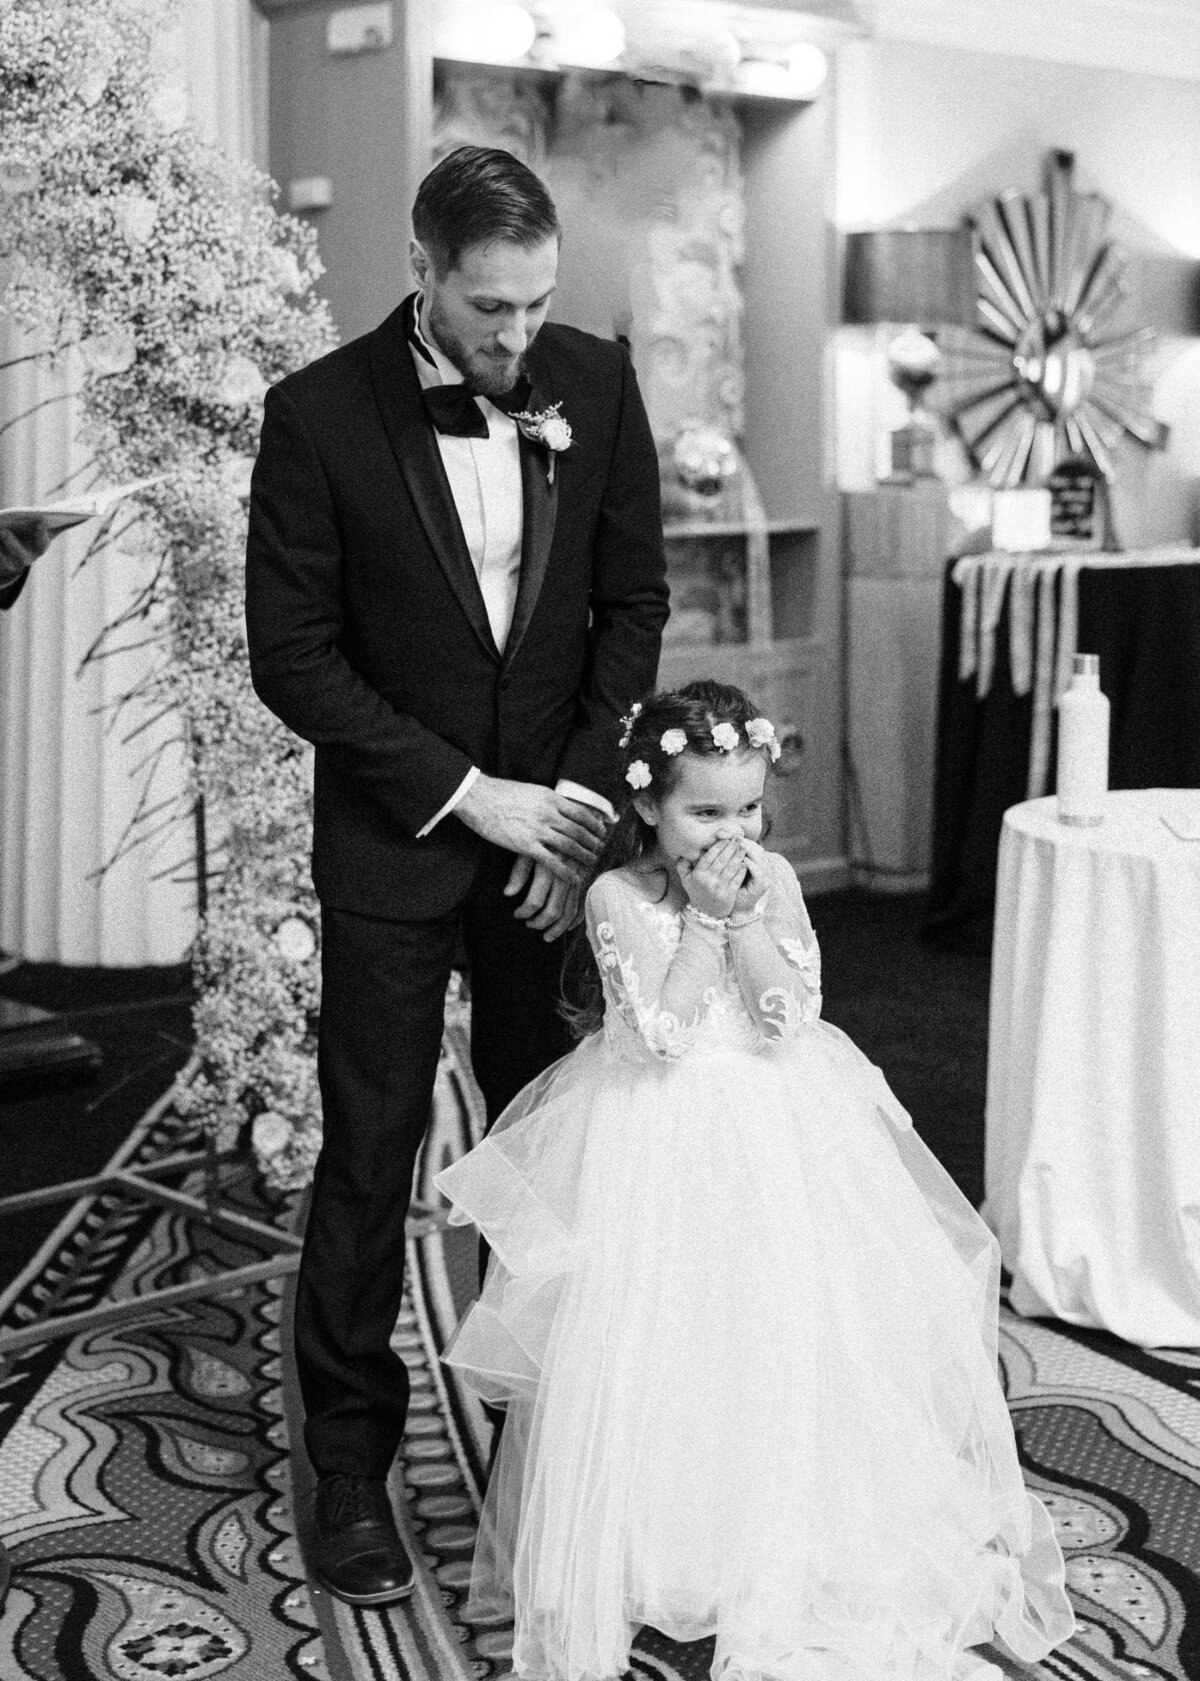 A man in a suit adjusts a young girl's dress at a formal event.